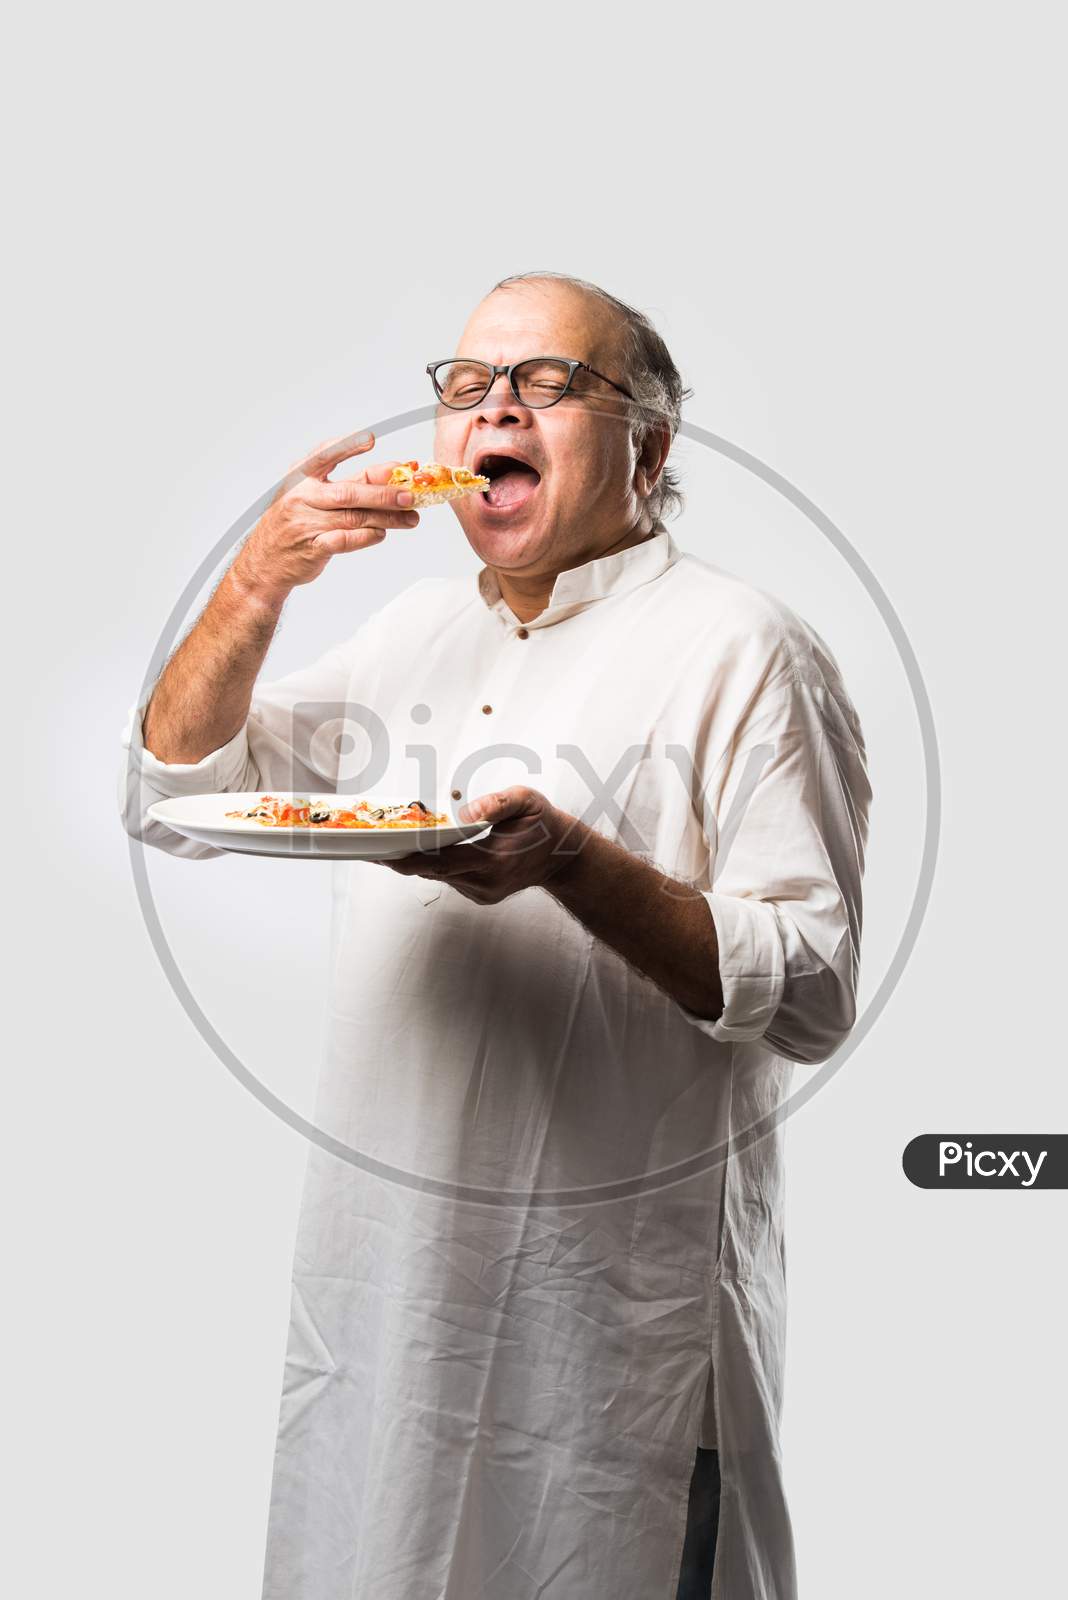 Asian Indian Old Man Eating Pizza With Funny Expressions